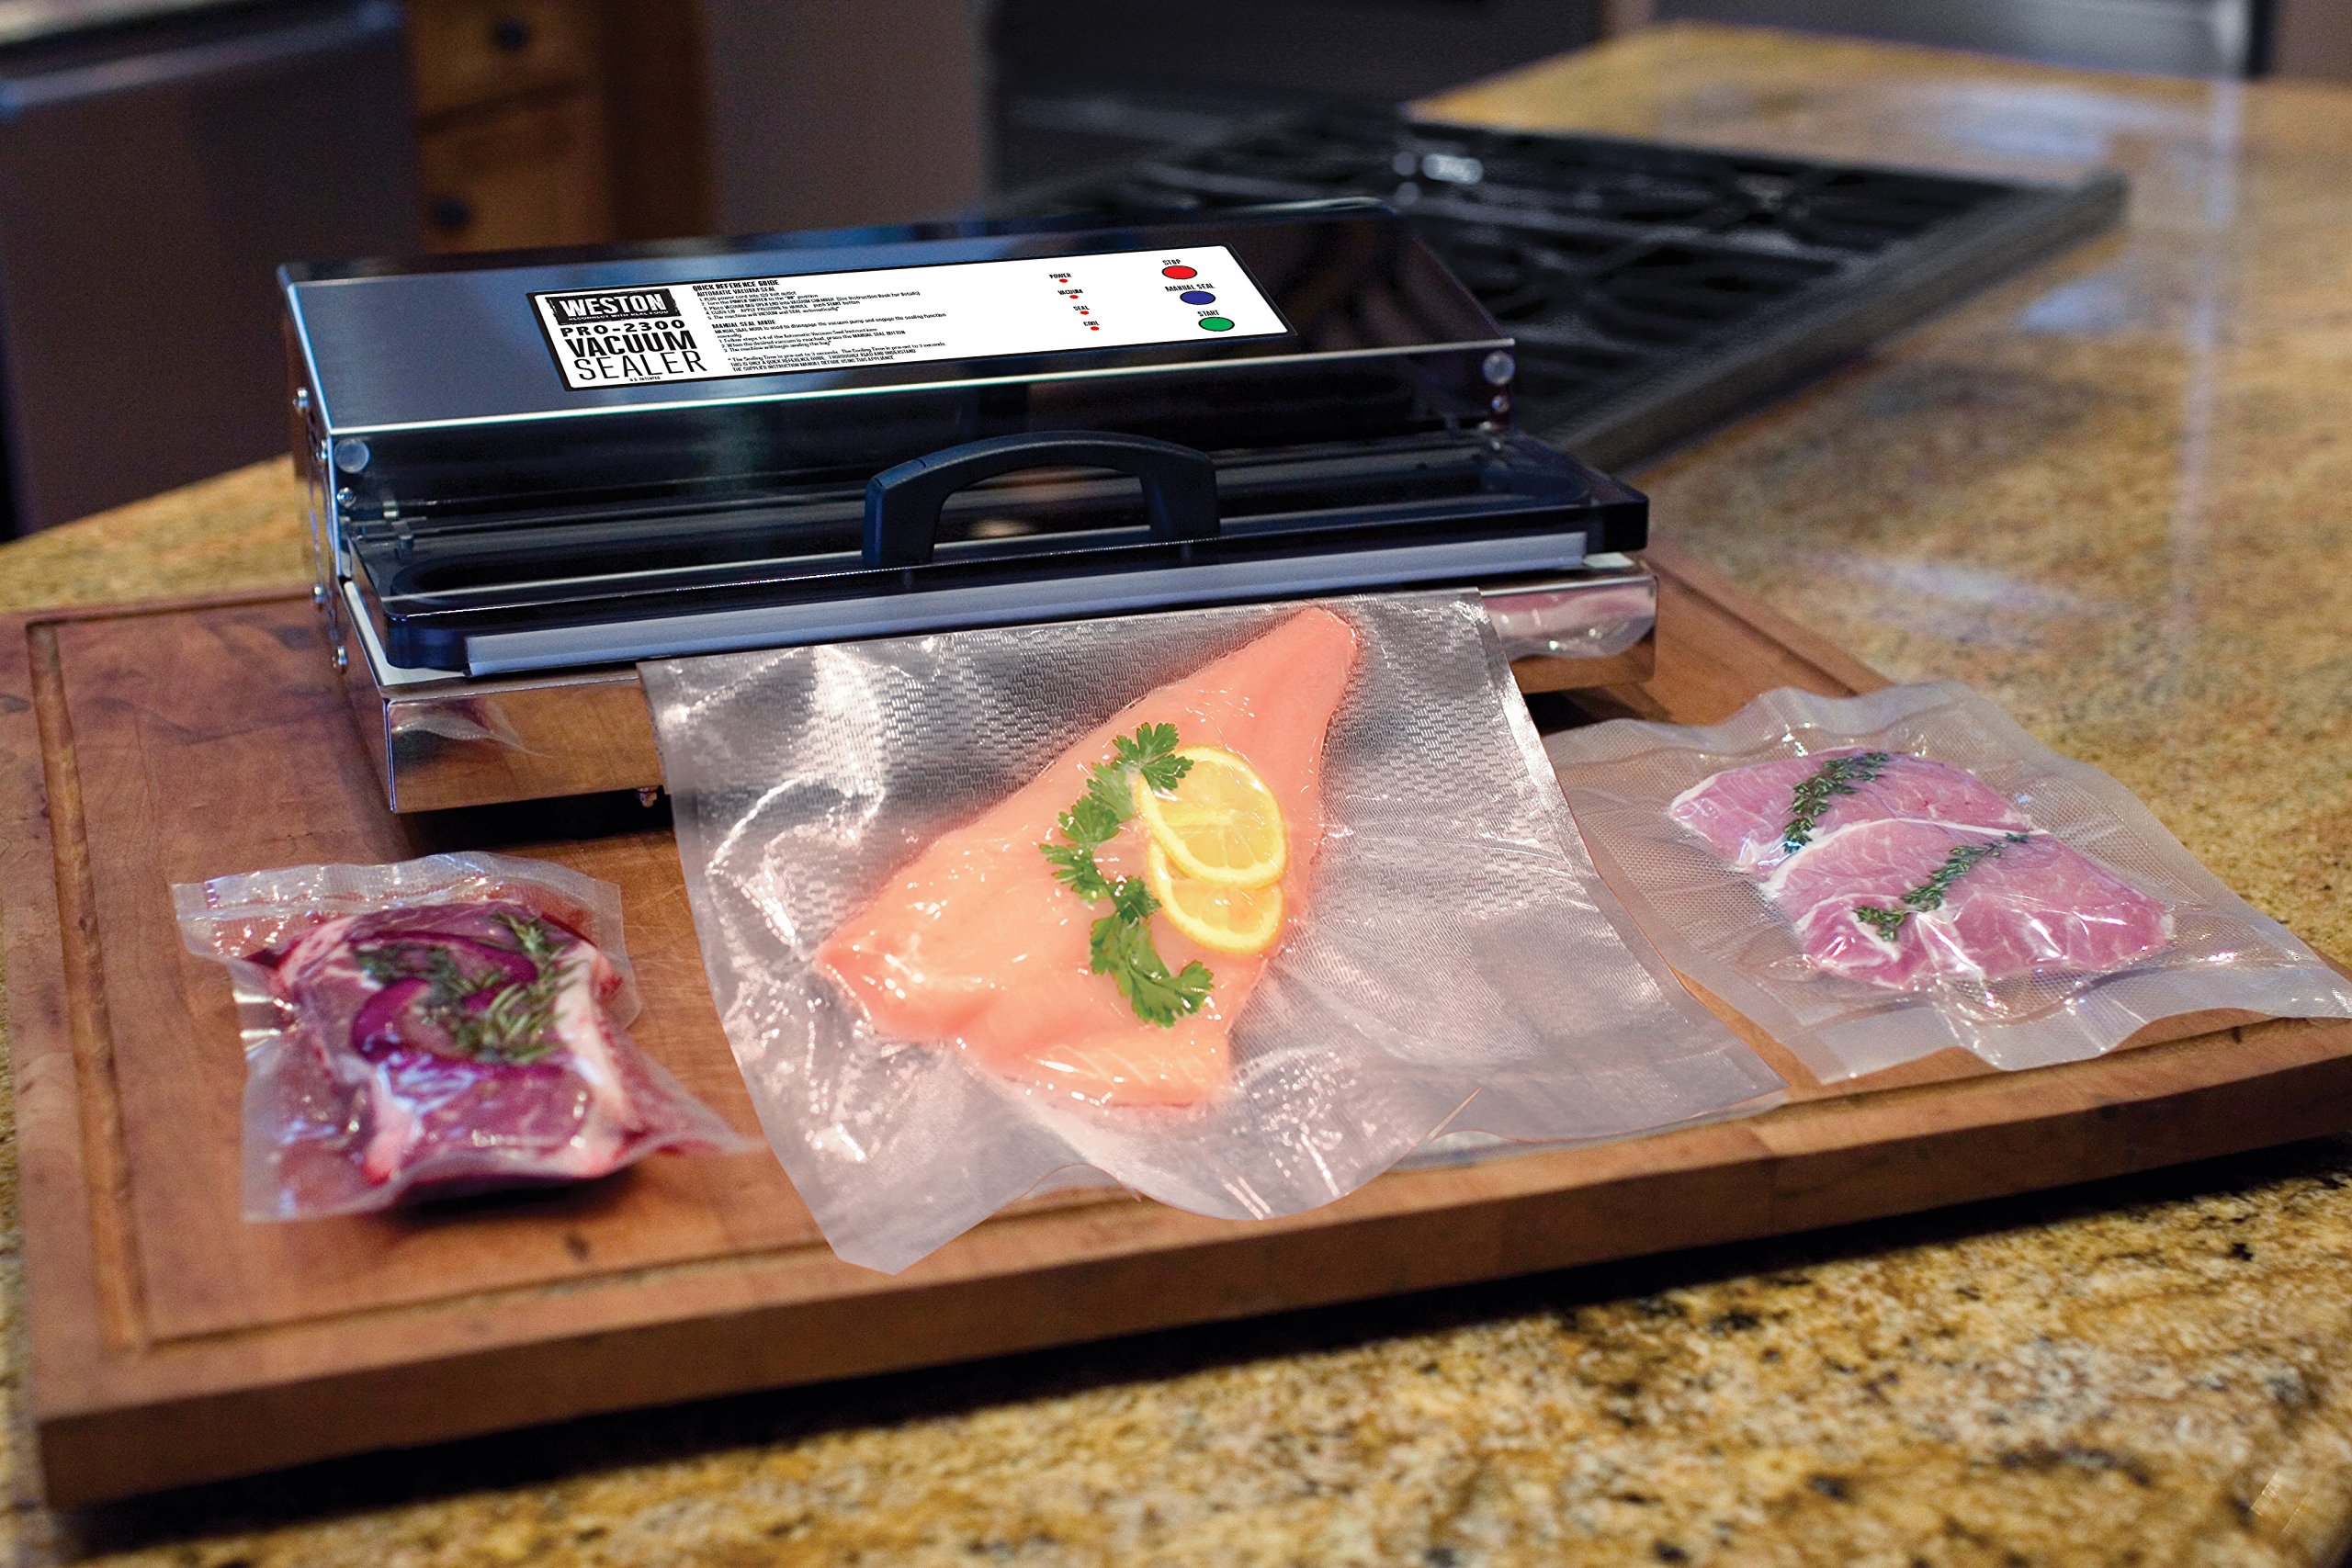 Weston Brands Vacuum Sealer Machine for Food Preservation & Sous Vide, Extra-Wide Bar, Sealing Bags up to 16